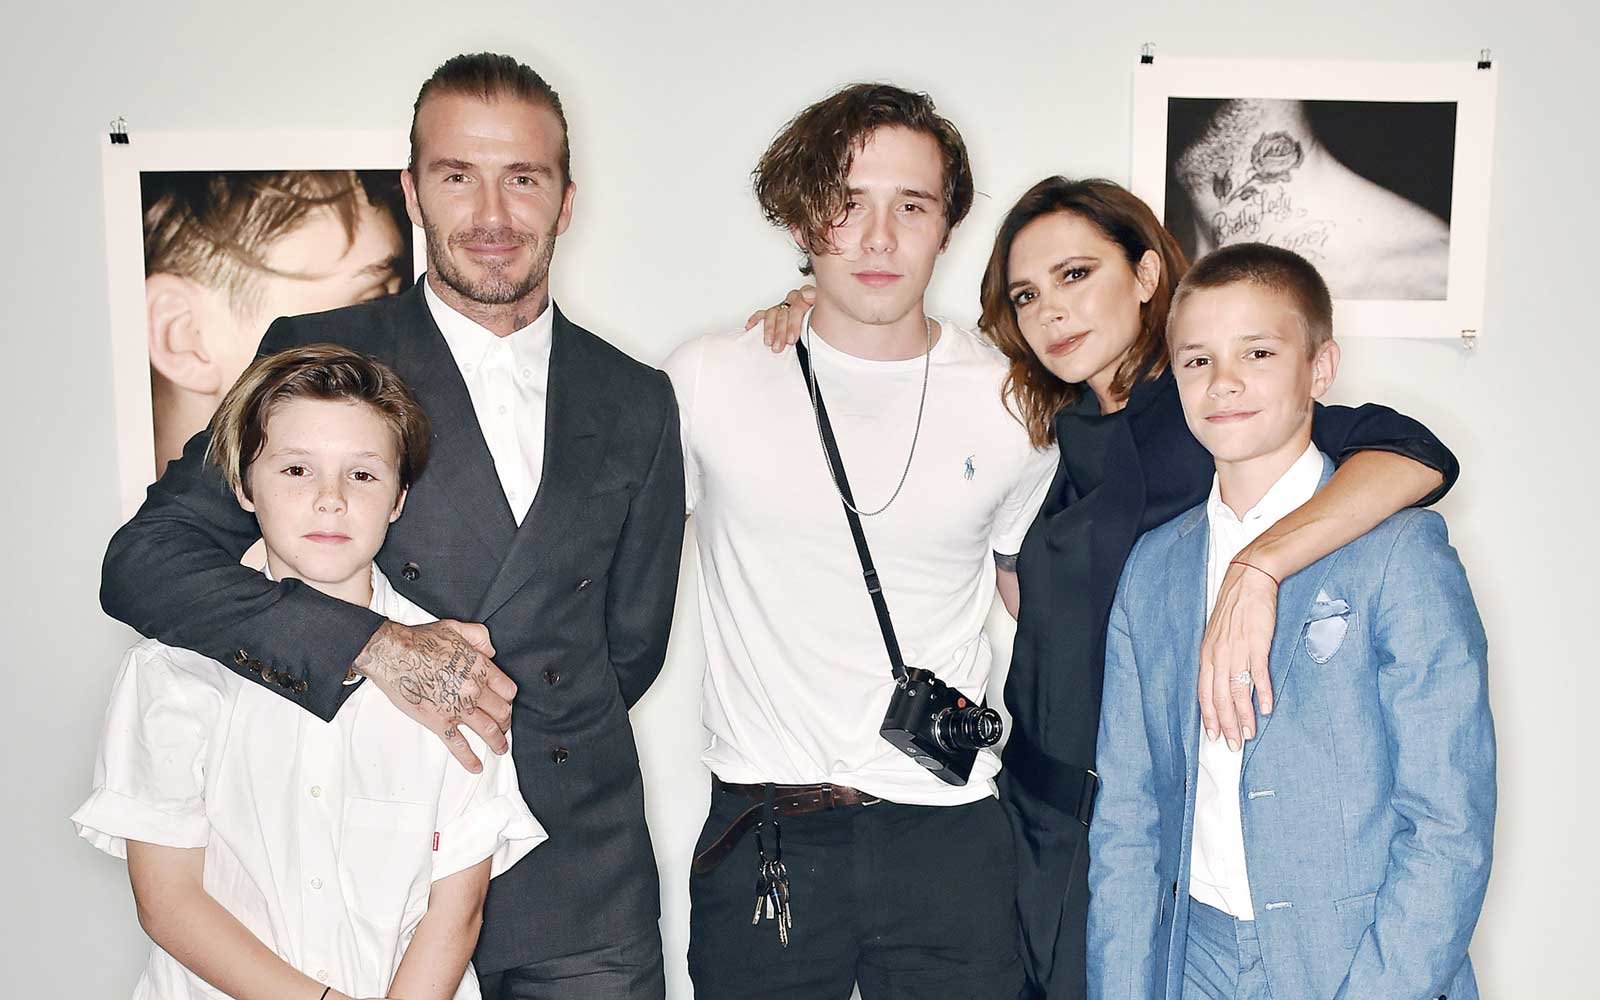 Design a Perfect Life and We’ll Tell You Which City You Should Live in Brooklyn Beckham: 'What I See' exhibition and book launch at Christie's in partnership with Polo Ralph Lauren, New Bond Street, London, UK   27 Jun 2017